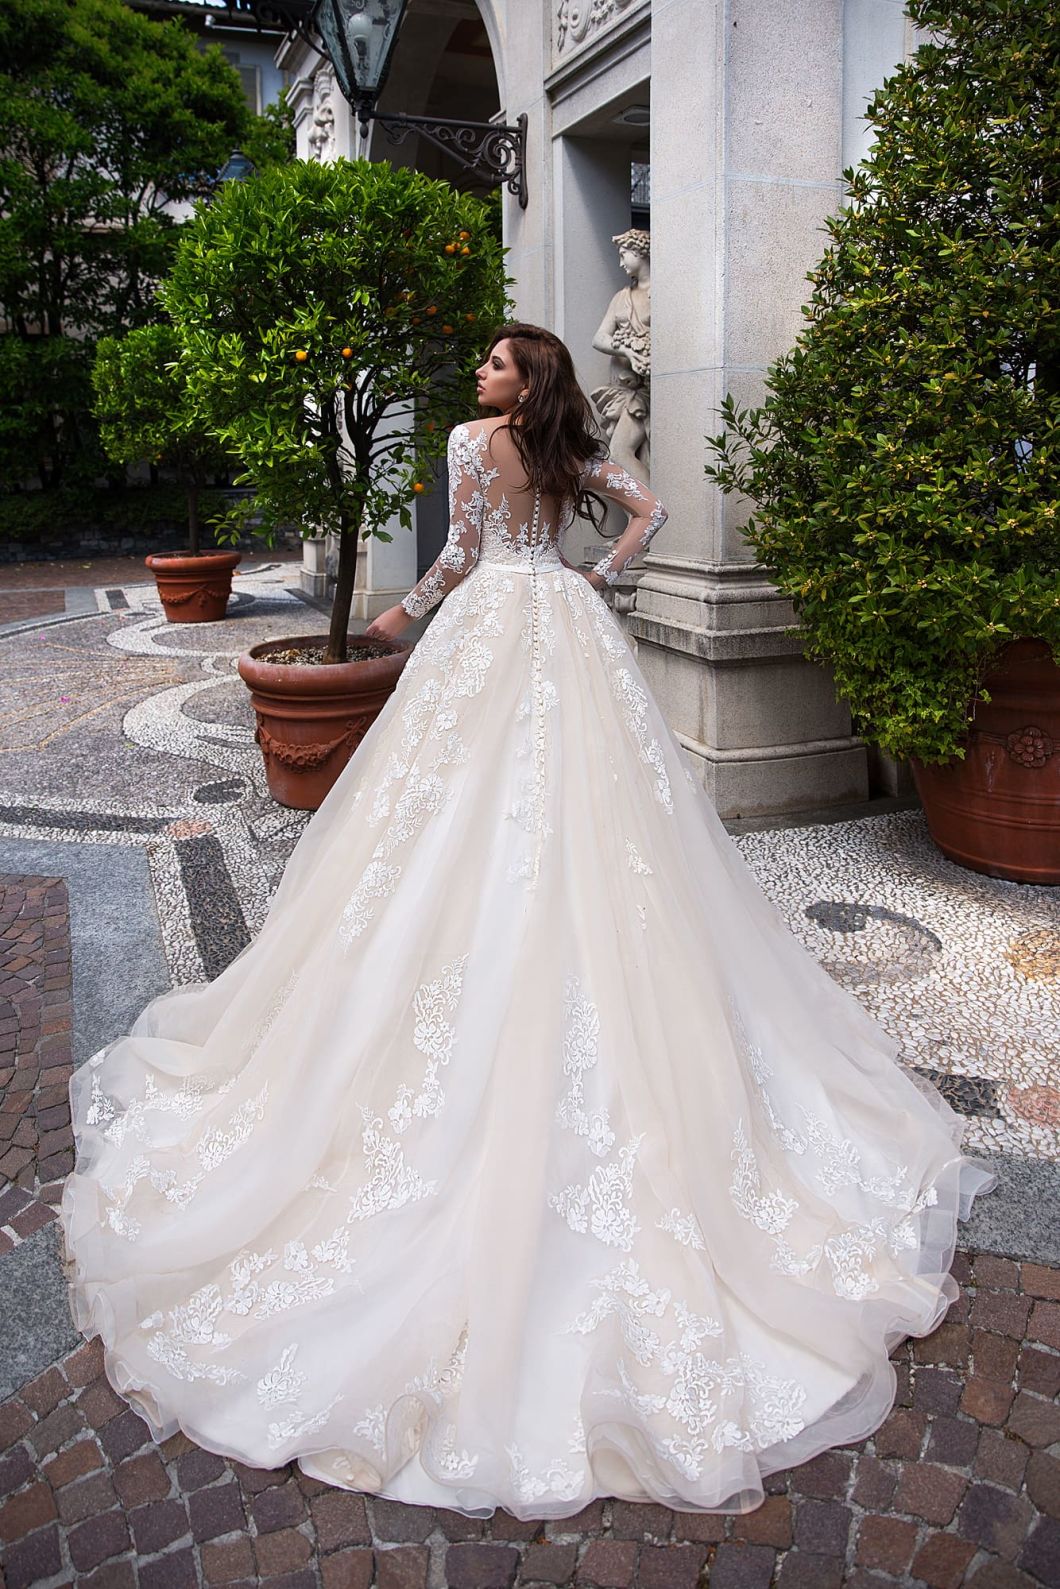 Amelie Rocky 2018 Full Sleeve Sheer Lace Bridal Wedding Dress Ball Gowns